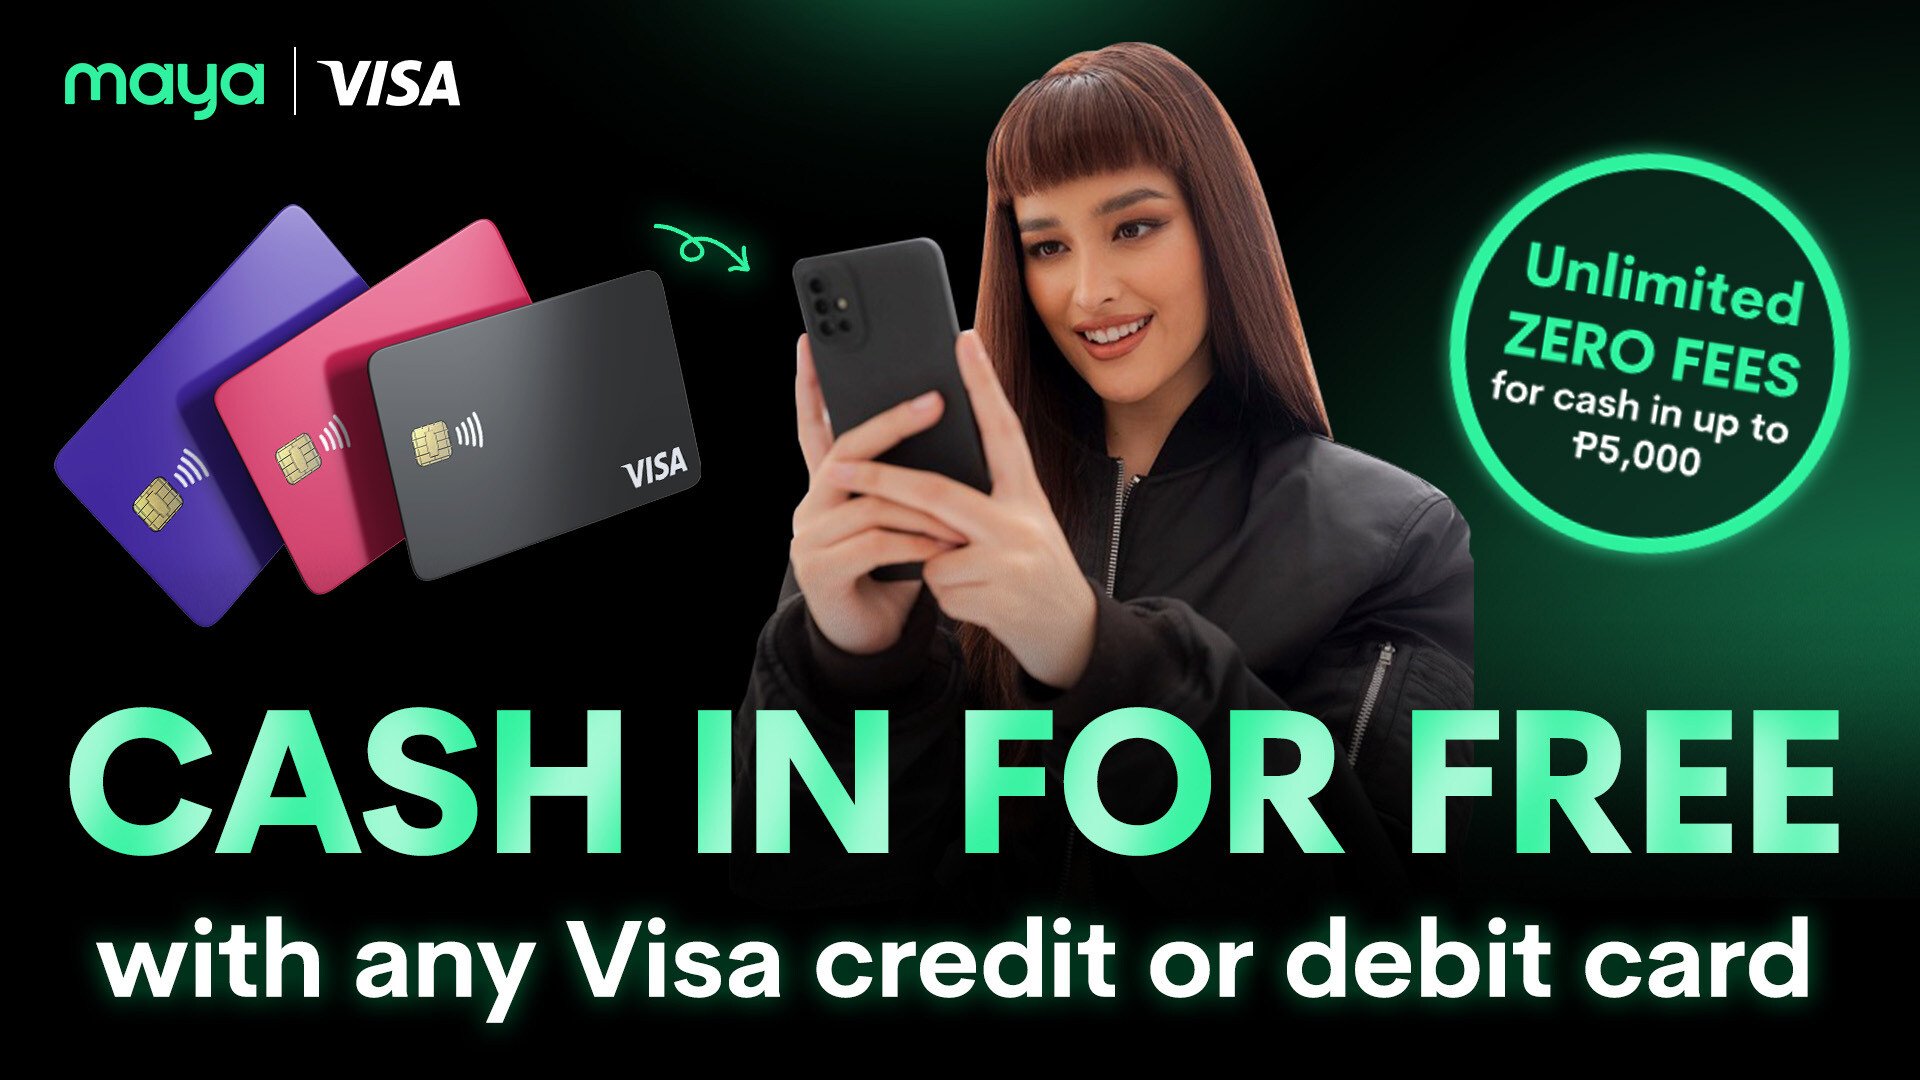 Enjoy FREE cash in with your Visa credit or debit card!